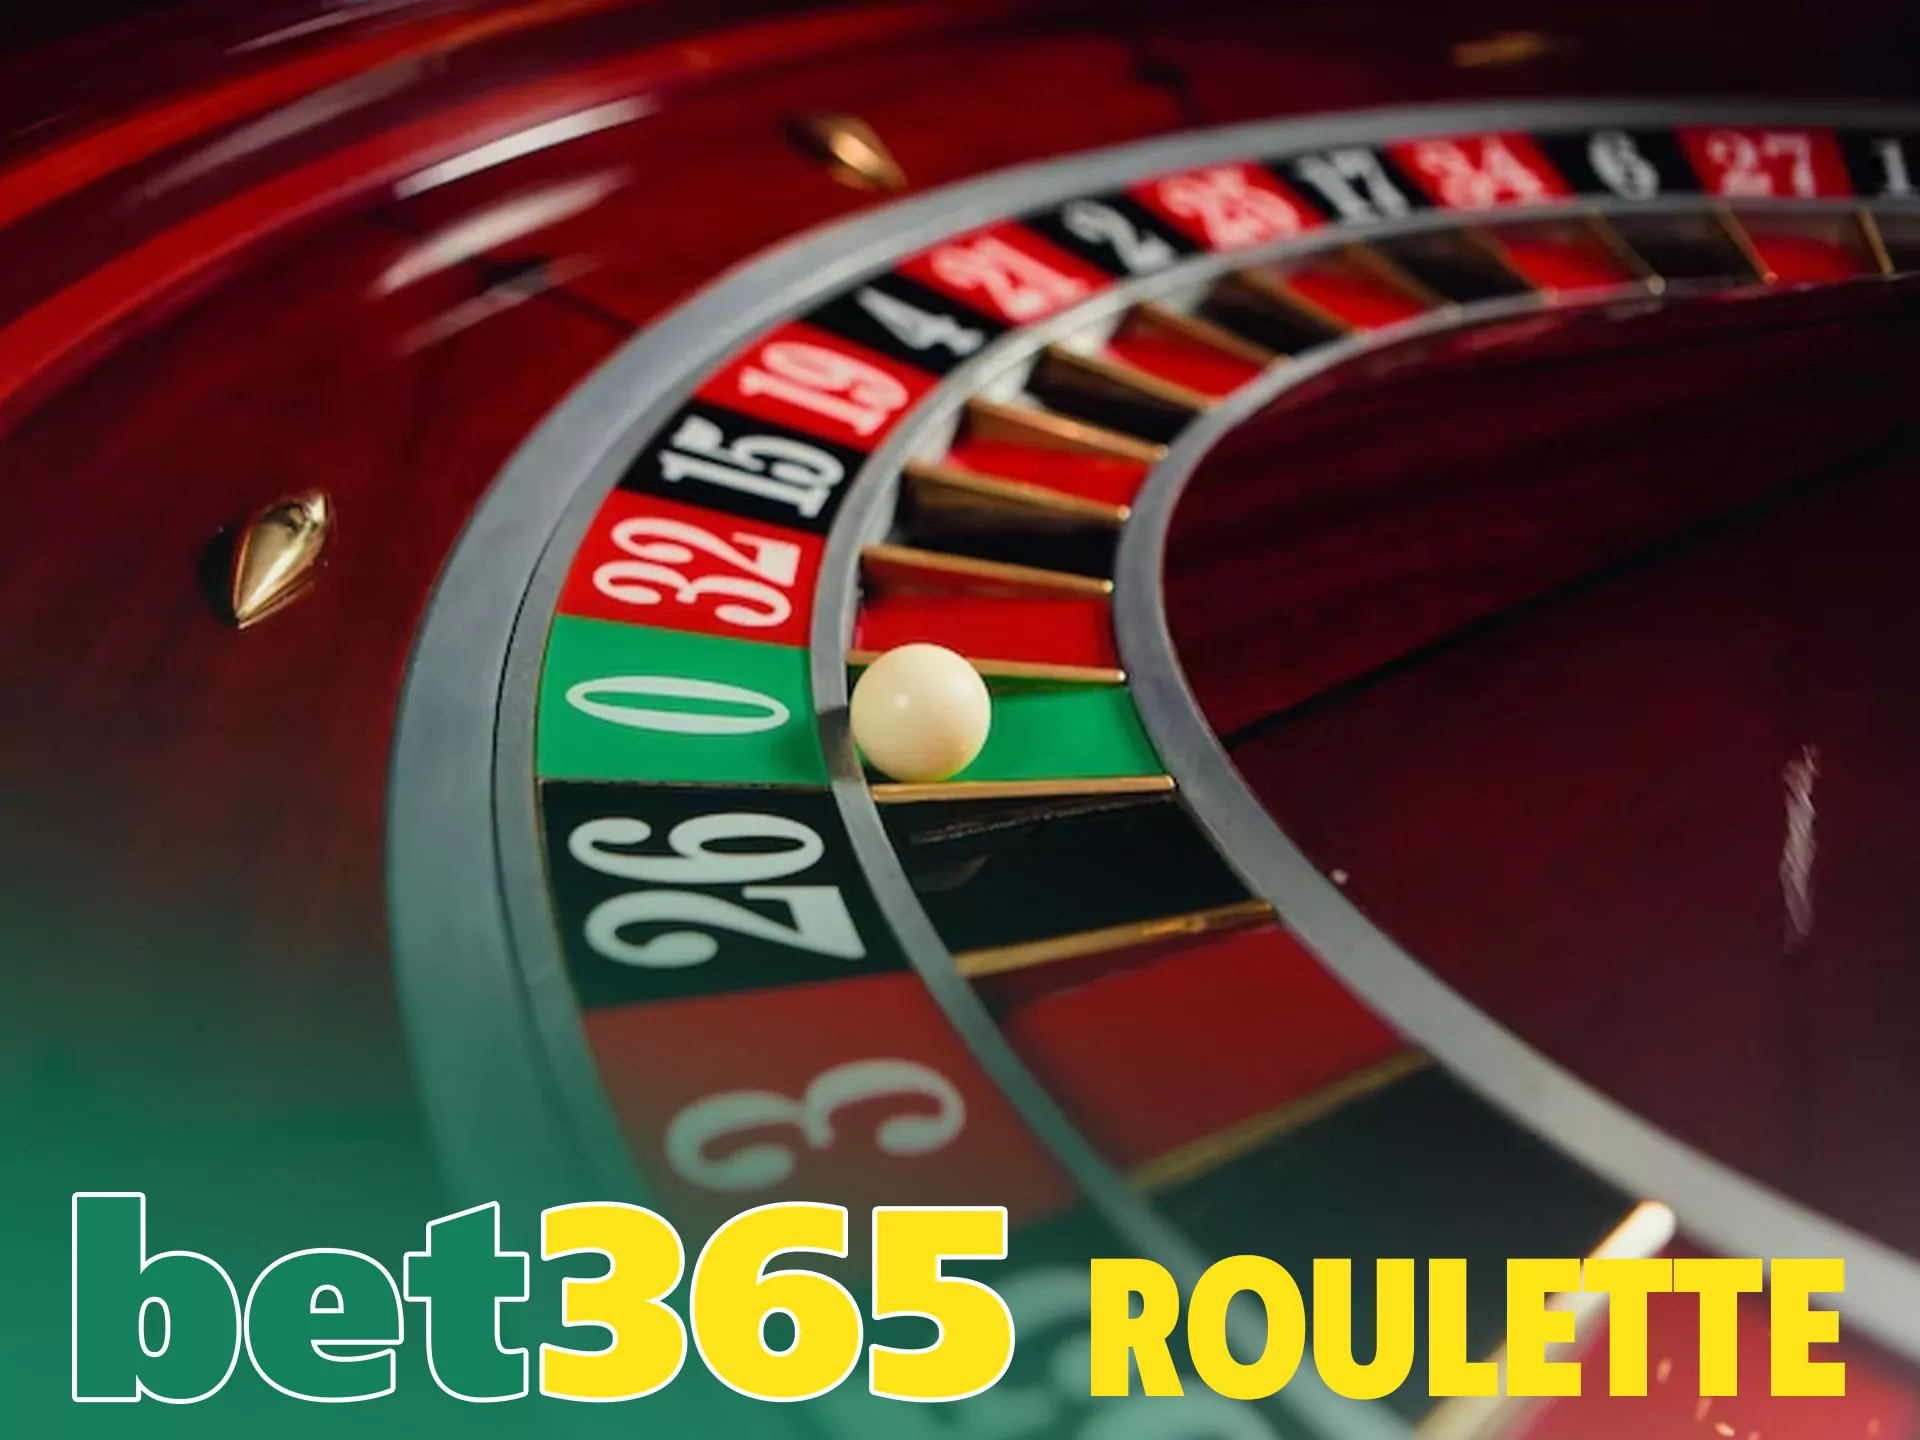 Spin roulette and win with Bet365.